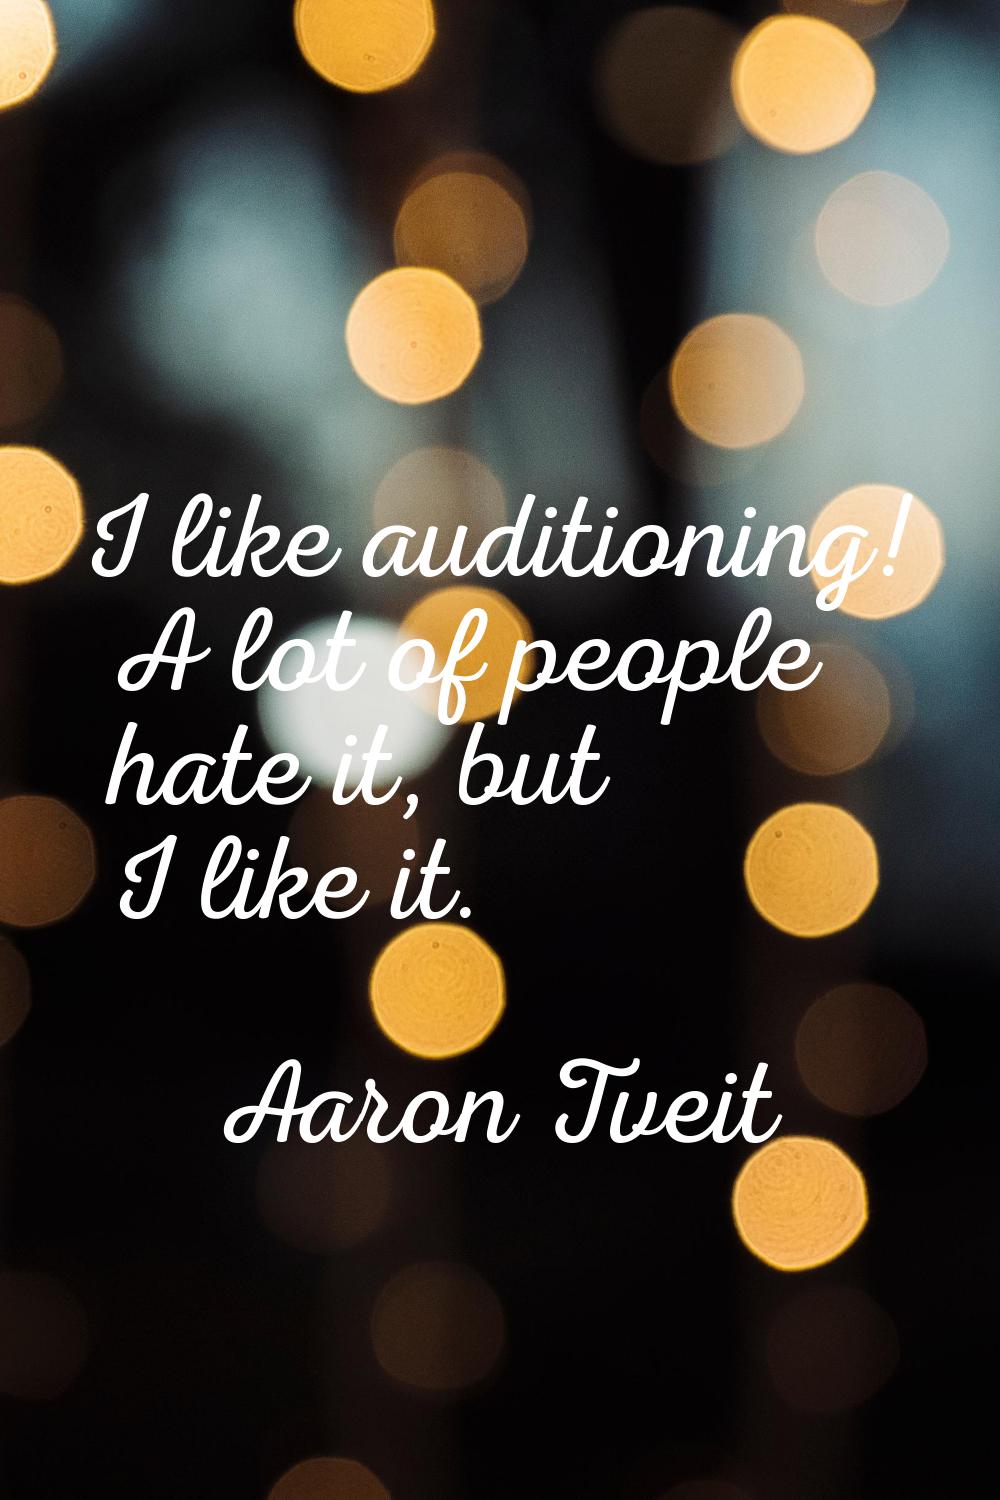 I like auditioning! A lot of people hate it, but I like it.